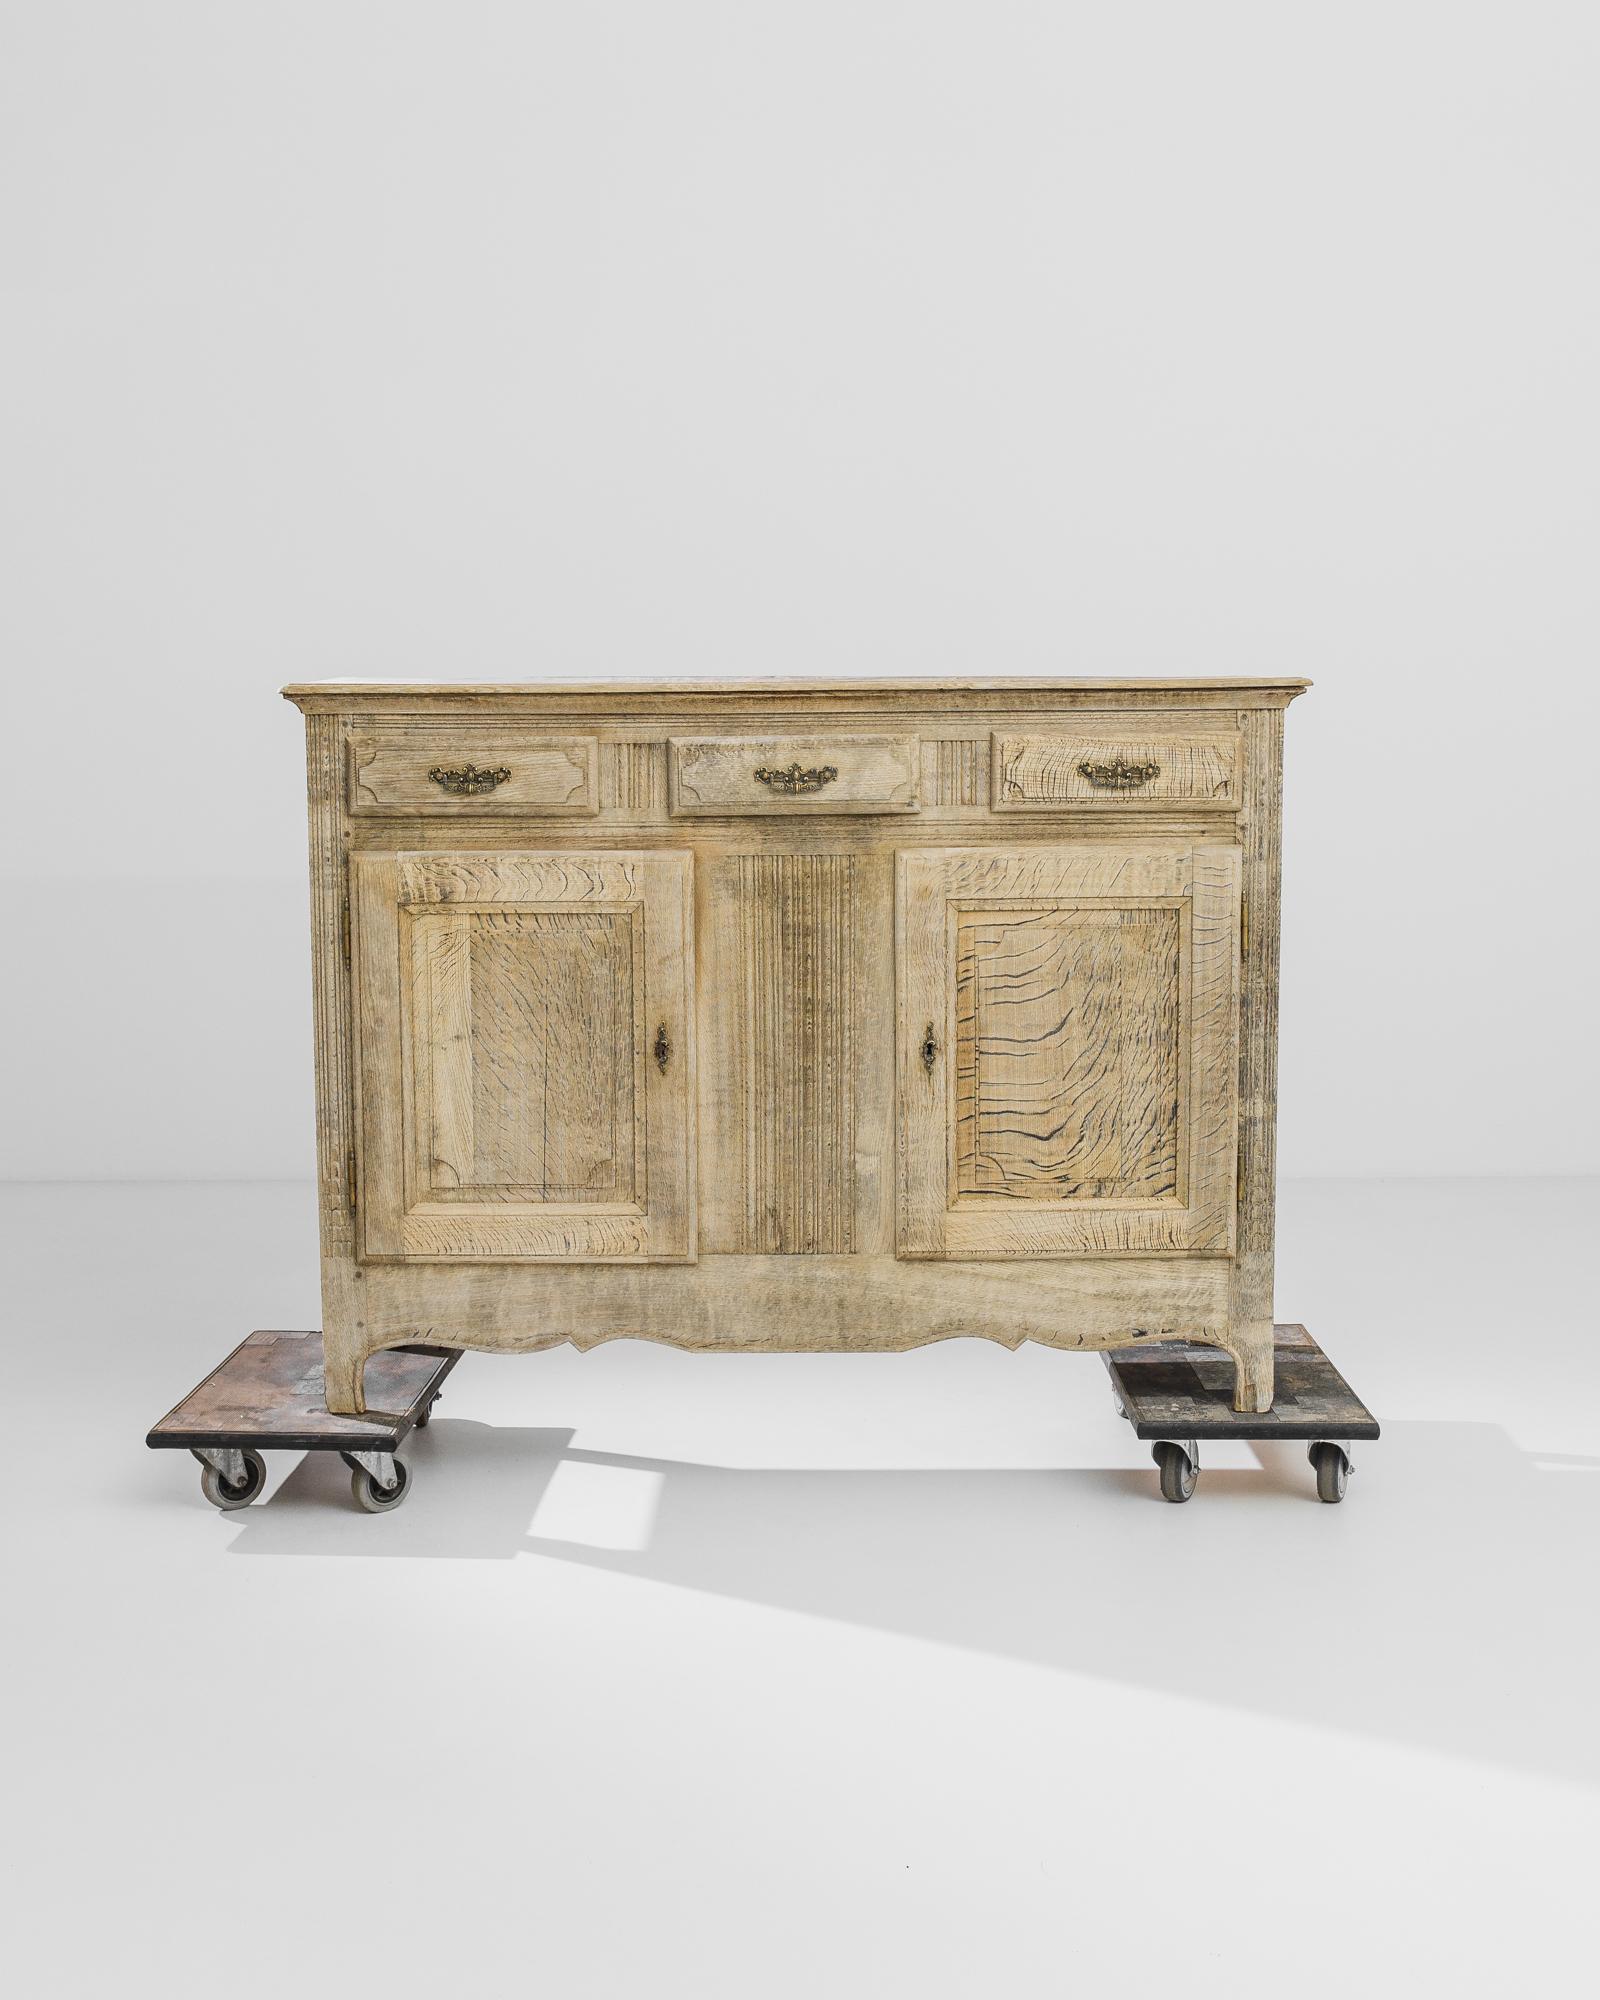 A handsome oak buffet from 1860s France, elevated upon cabriole feet. Carved accents — fluted panelling and a delicate pattern of mermaid scales on the lower corners — add subtle decorative touches, while elaborate gilded drawer handles provide a